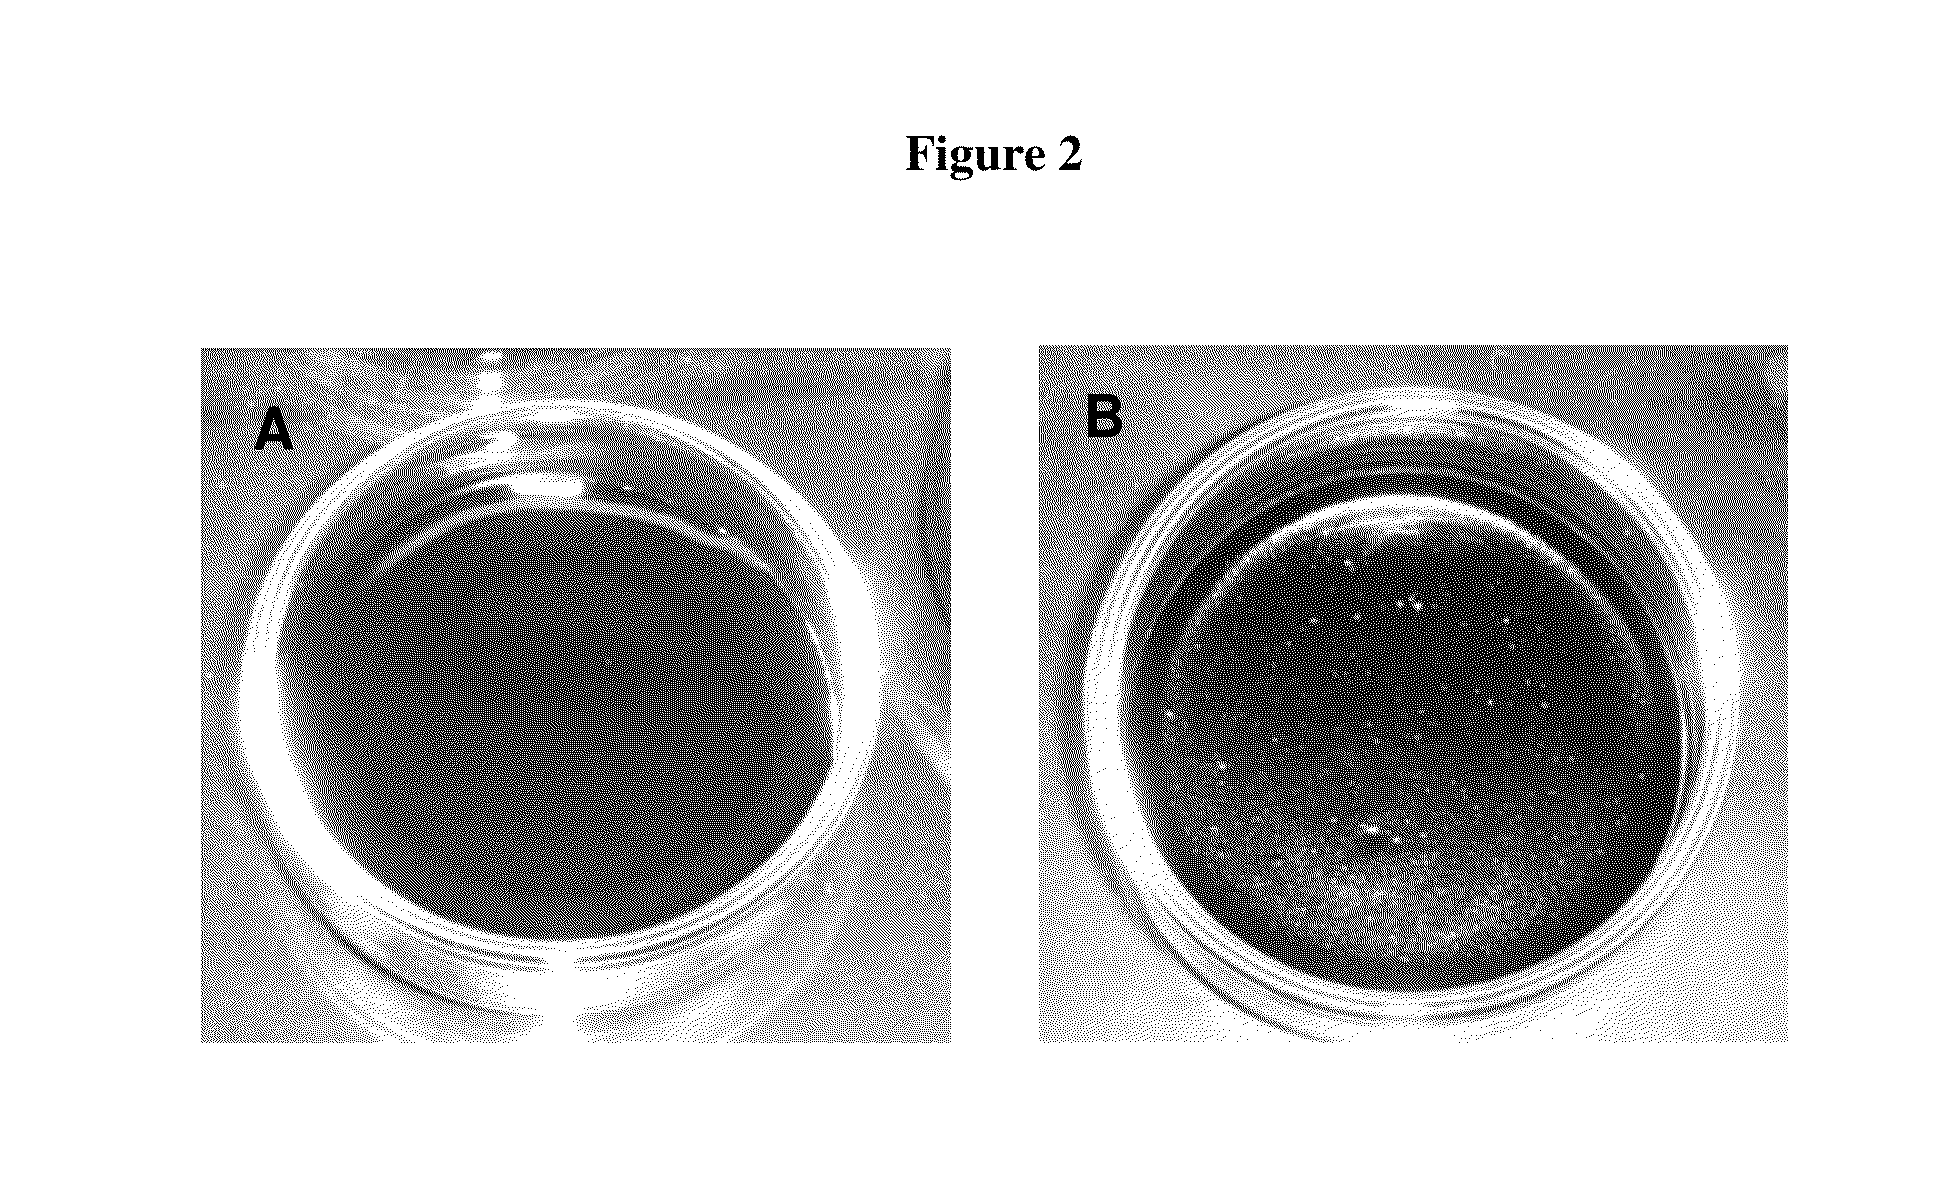 Method of making cohesive carbon assembly and its applications